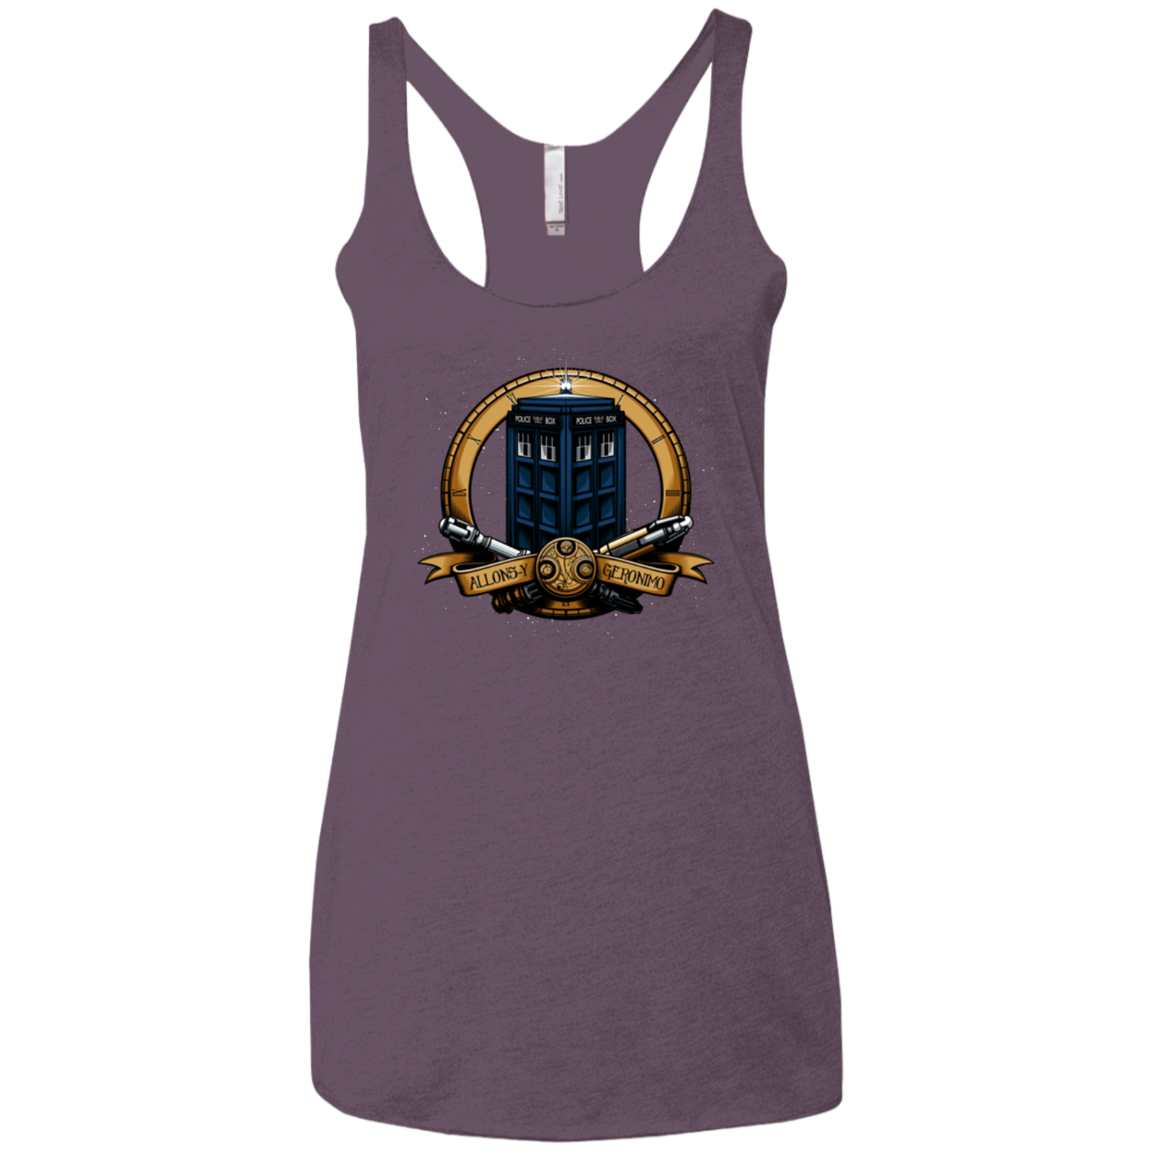 The Day of the Doctor Women's Triblend Racerback Tank